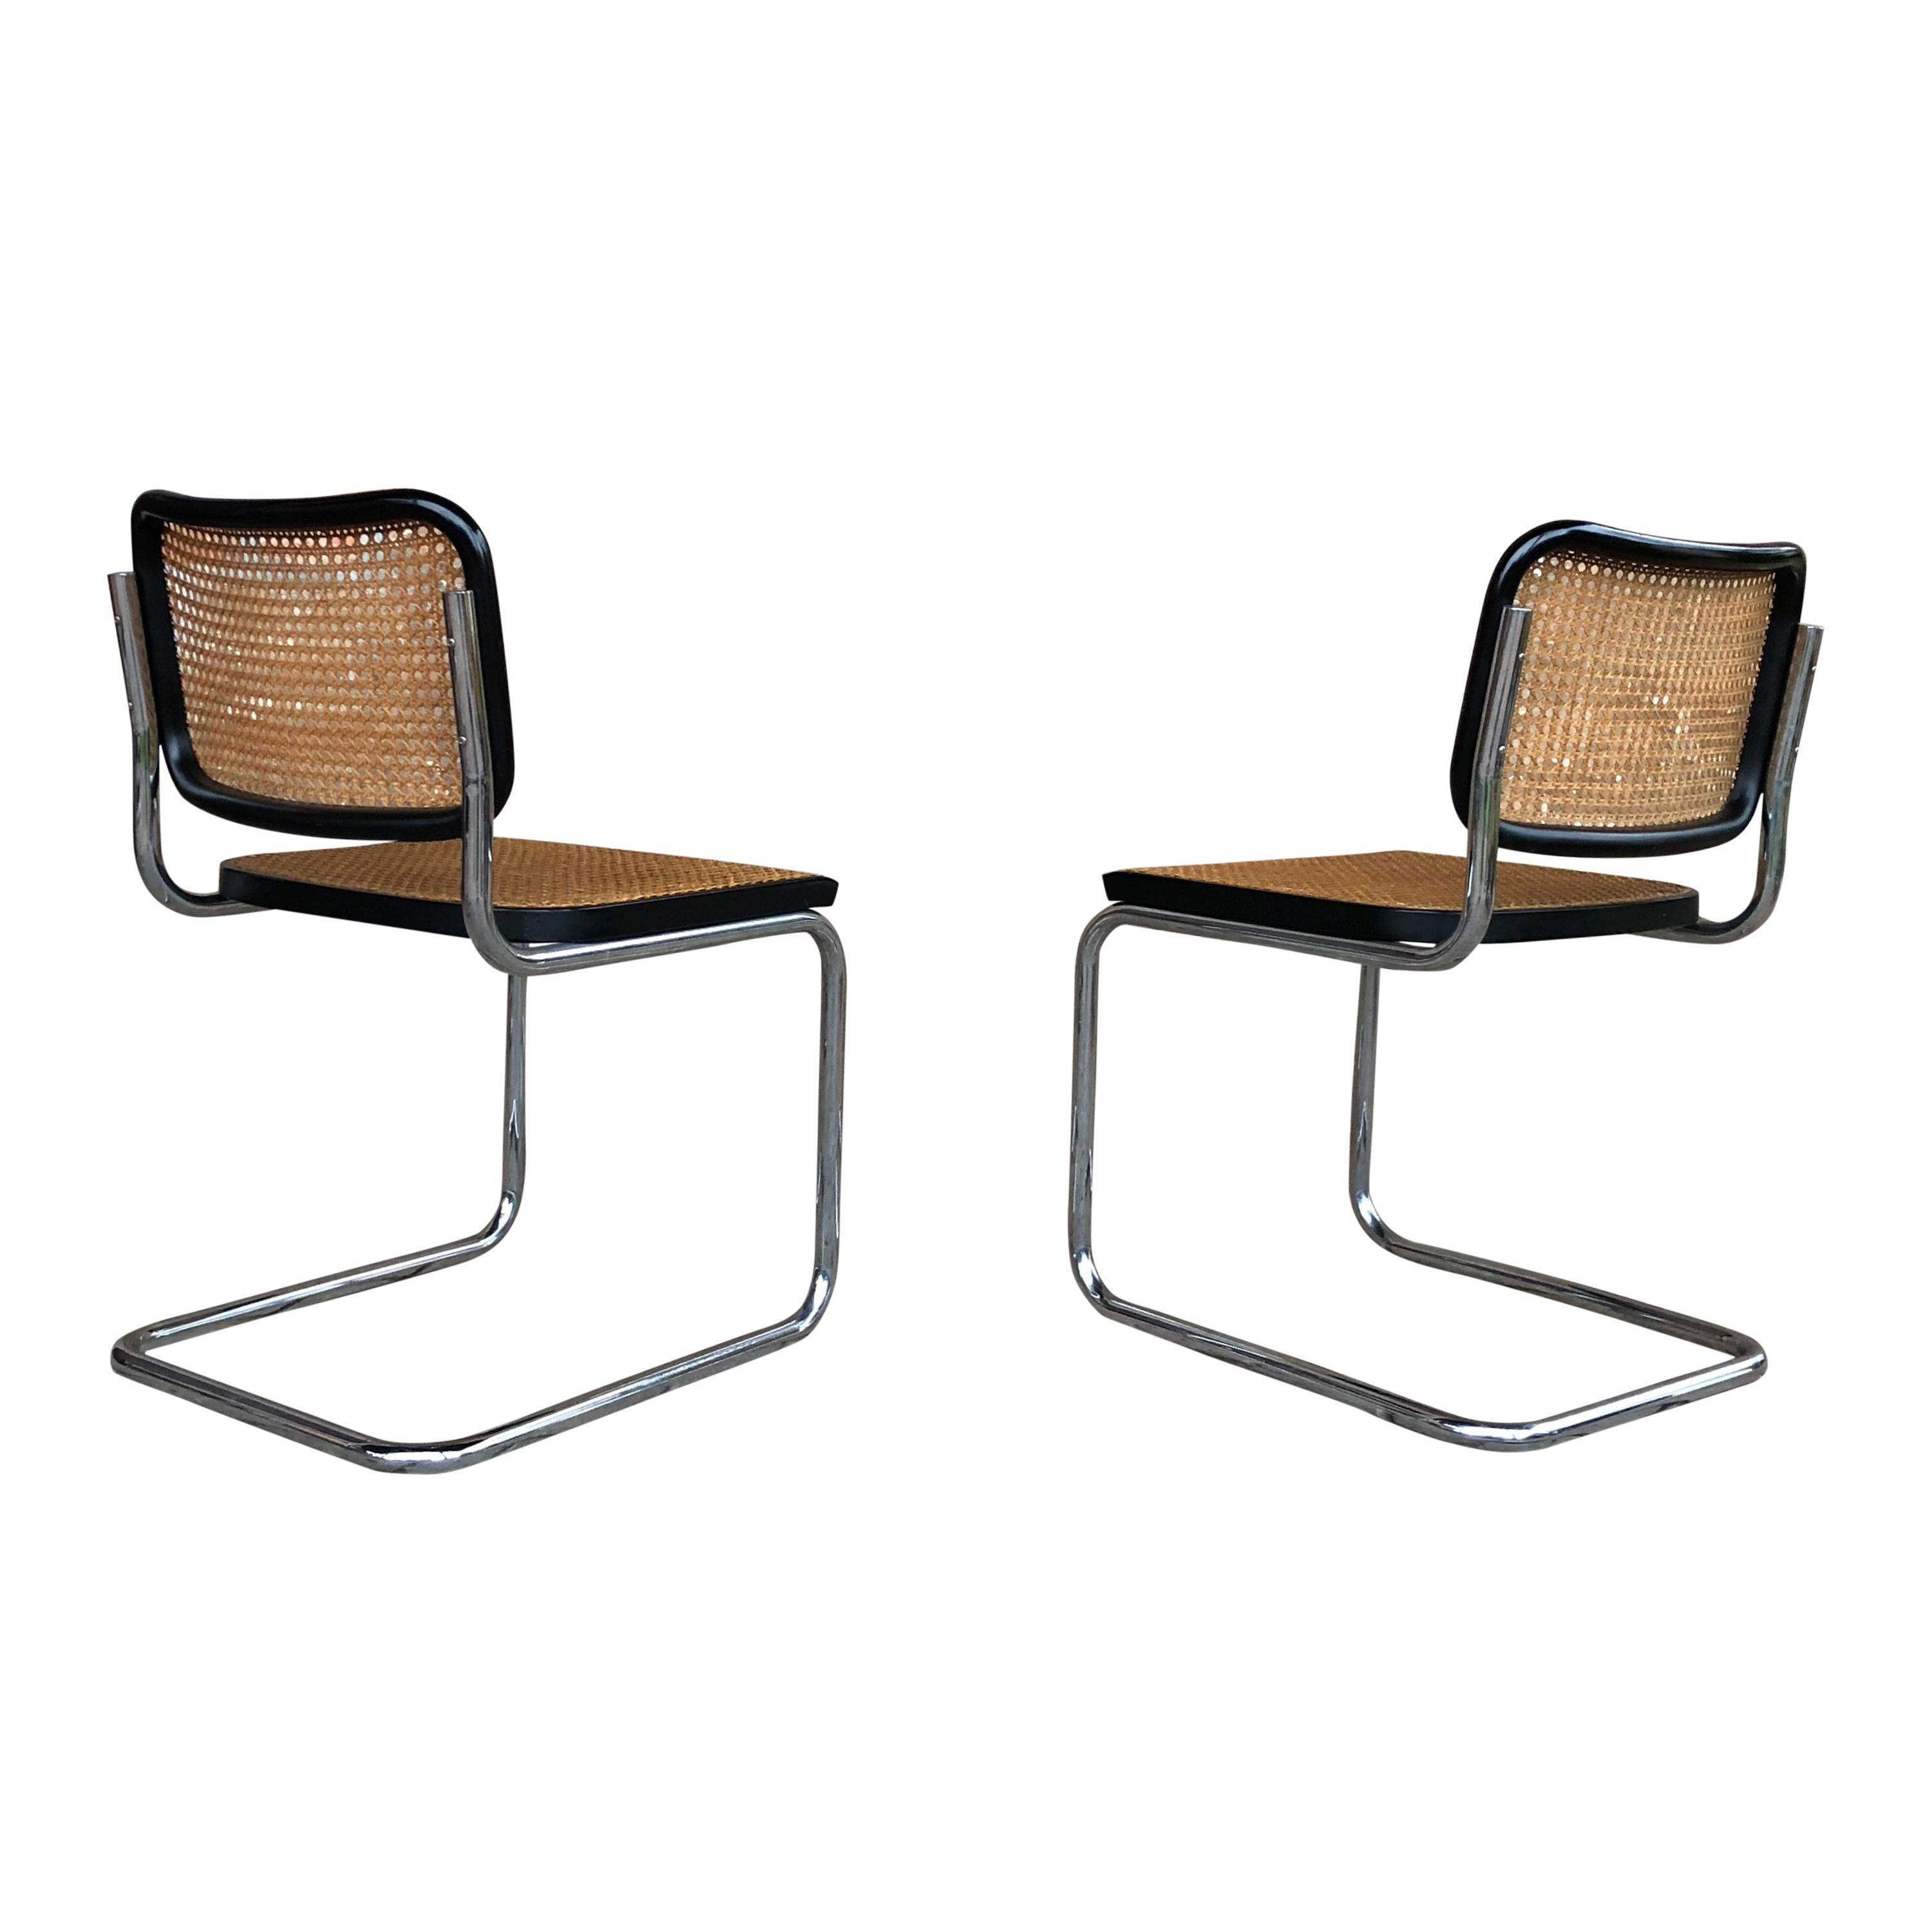 Wicker Marcel Breuer B32 Cesca Dining Room Chairs for Gavina Knoll, 1963, Set of 4 For Sale